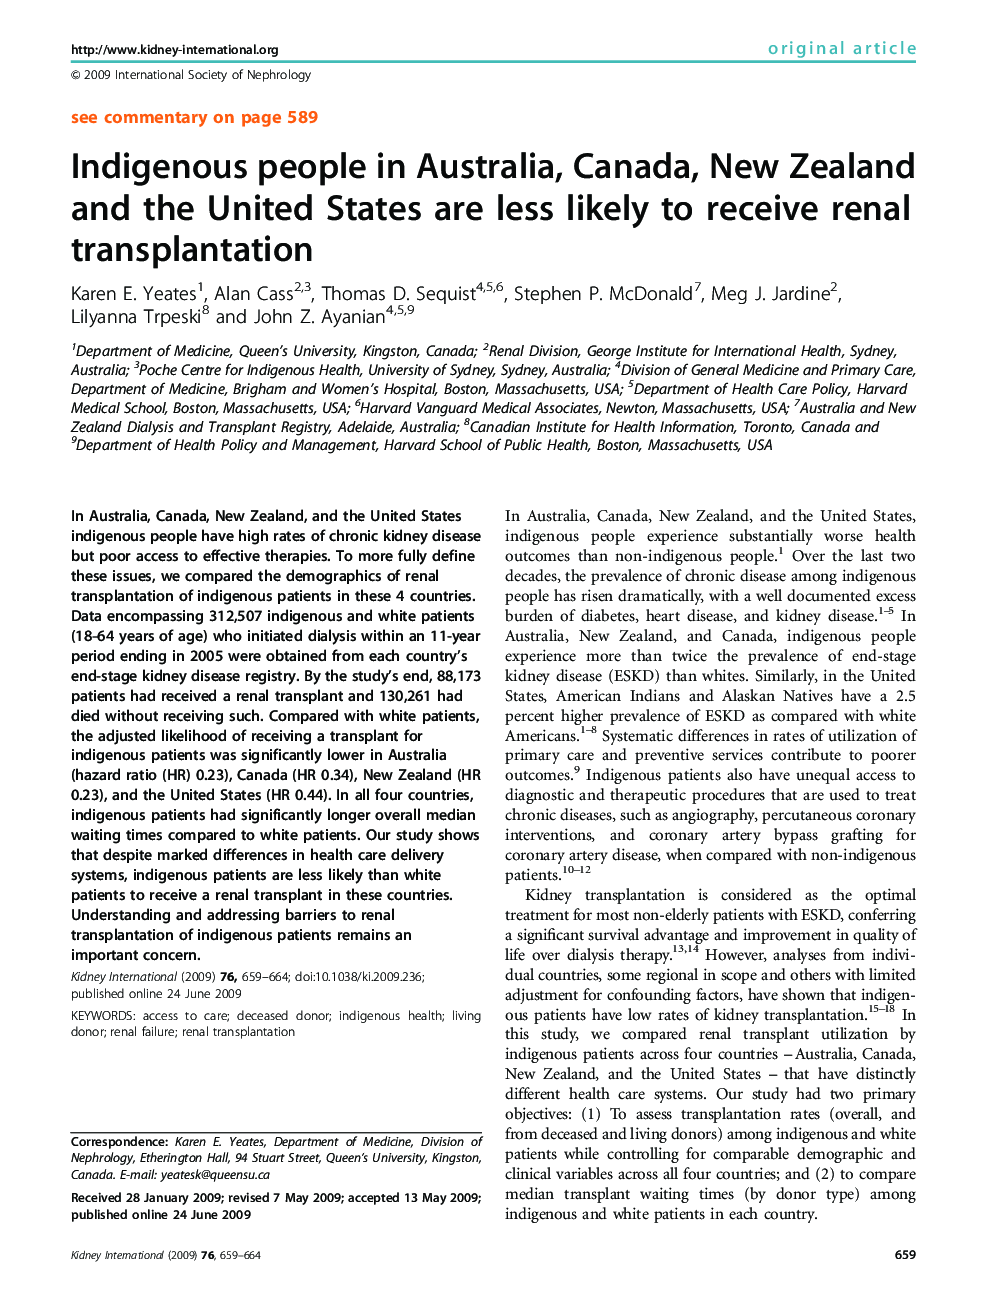 Indigenous people in Australia, Canada, New Zealand and the United States are less likely to receive renal transplantation 